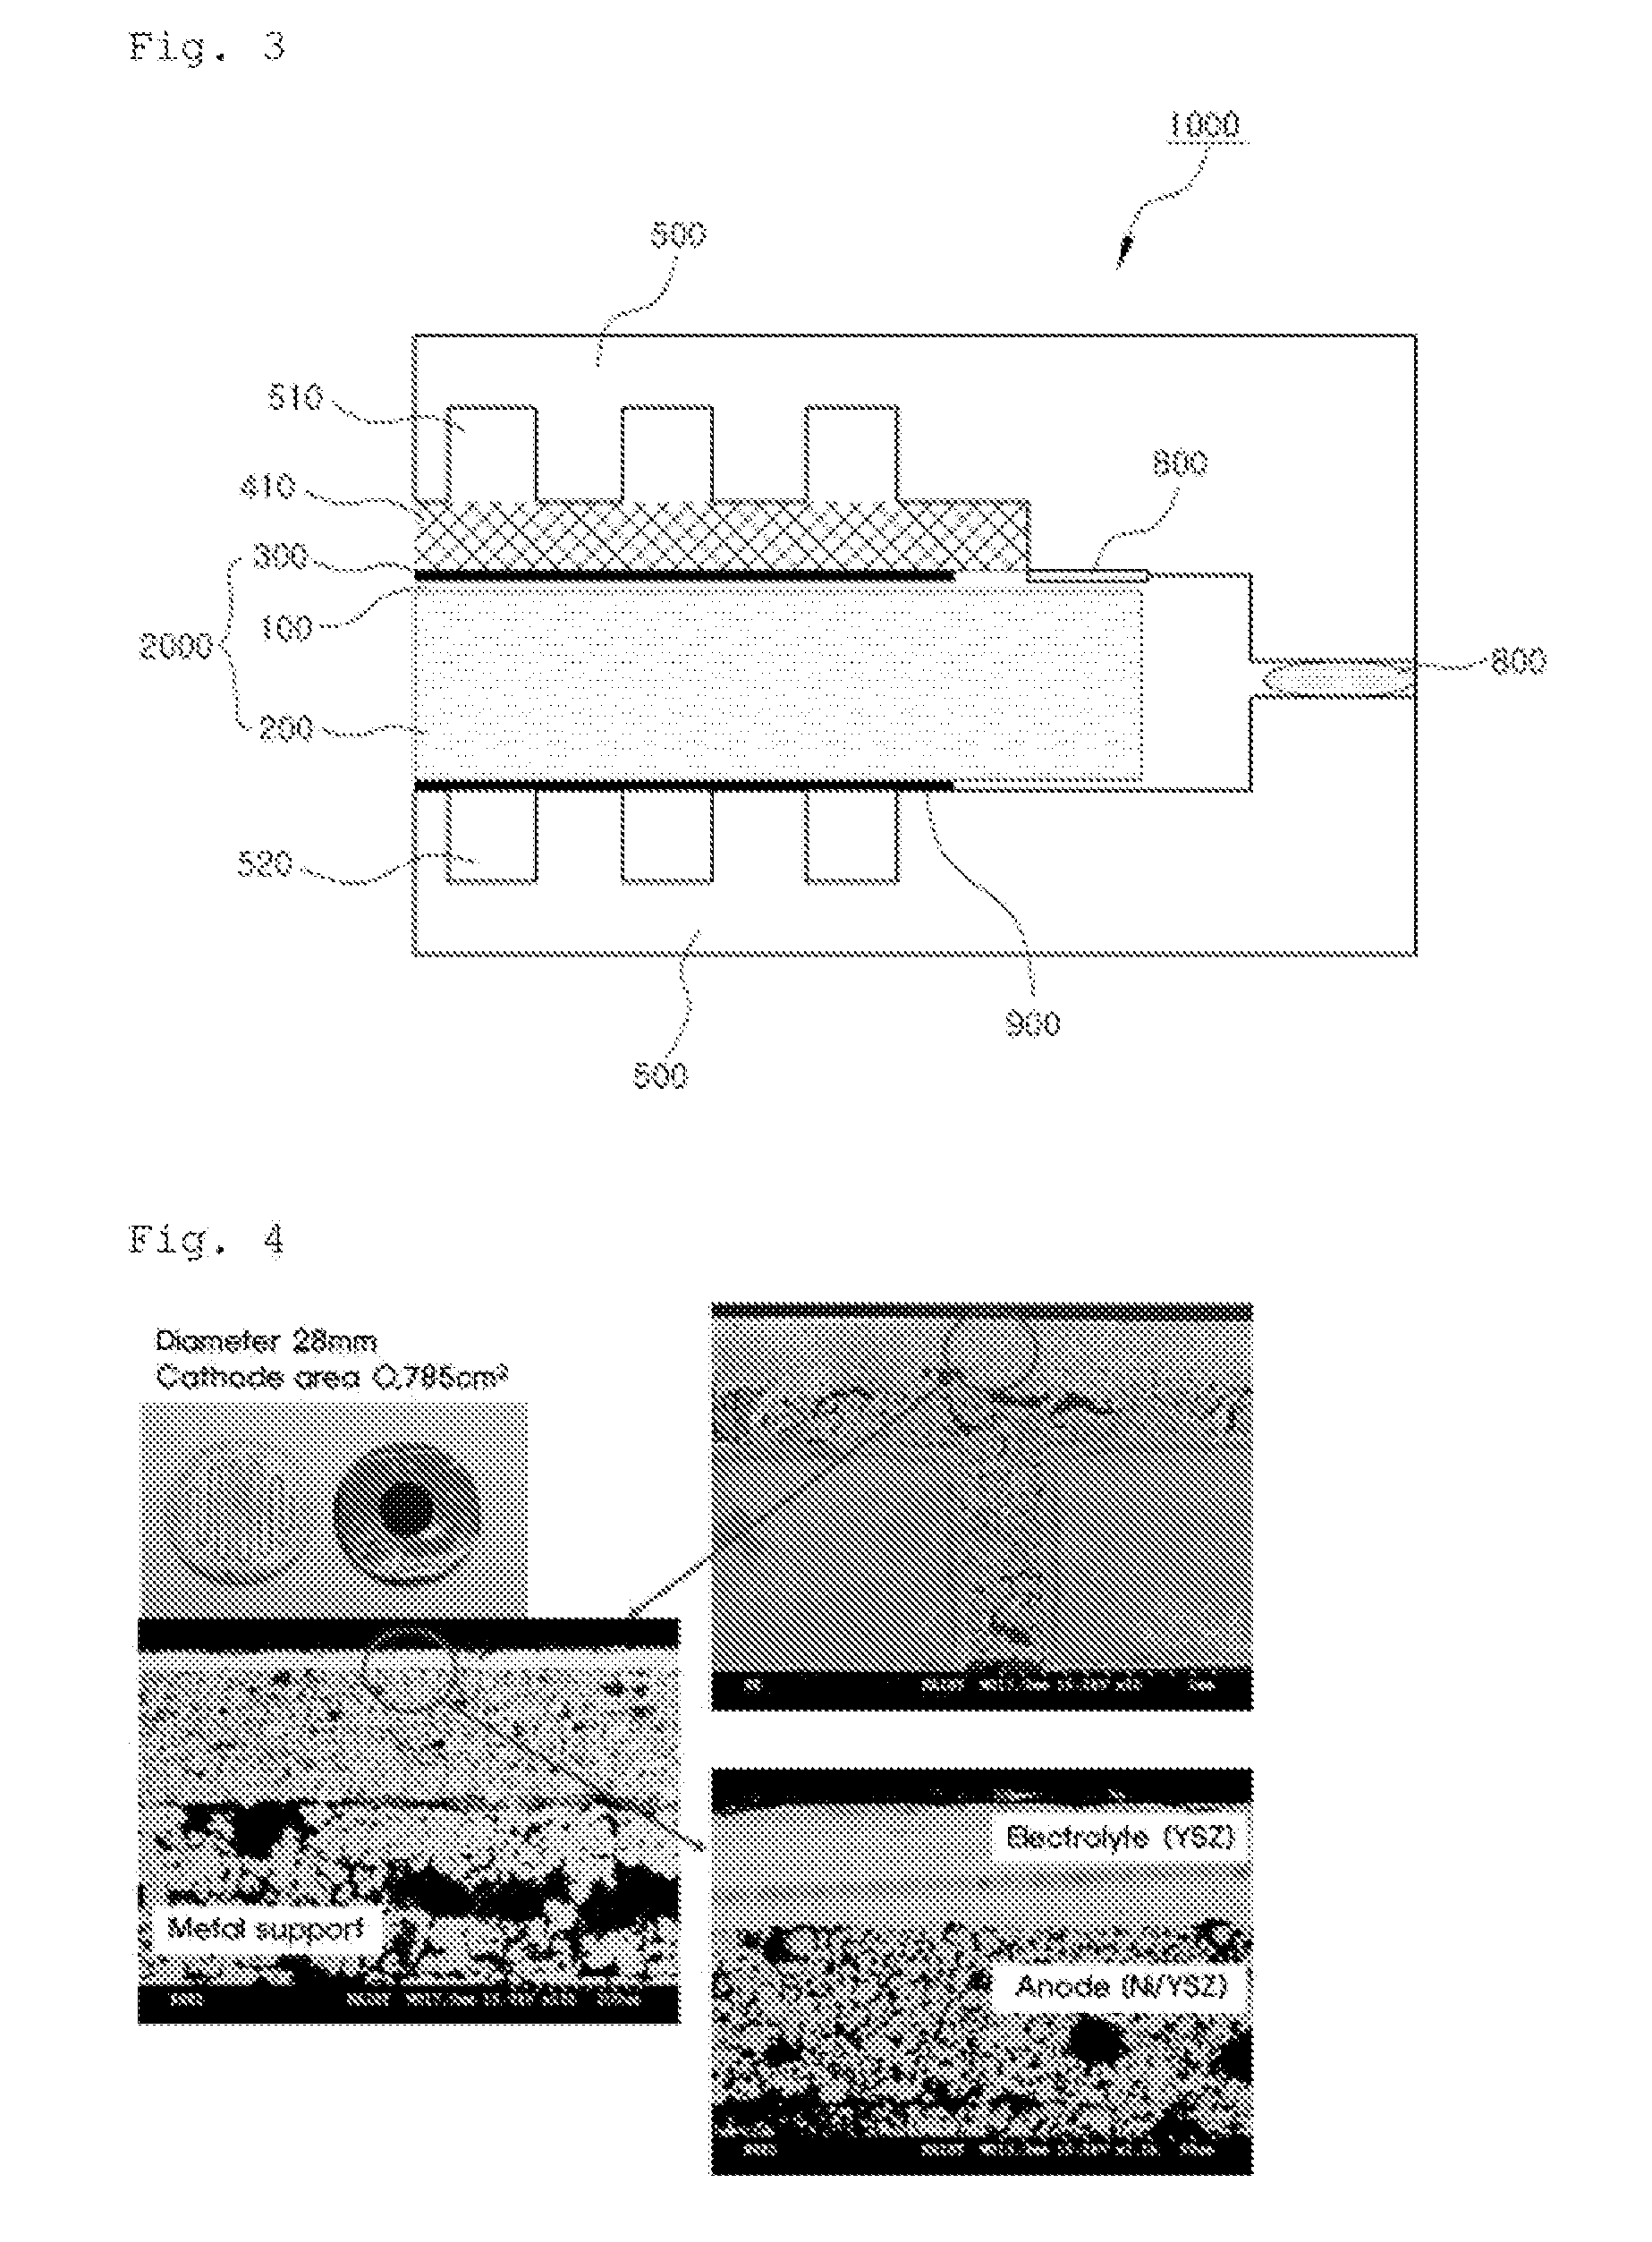 Combination Structure Between Single Cell and Interconnect of Solid Oxide Fuel Cell